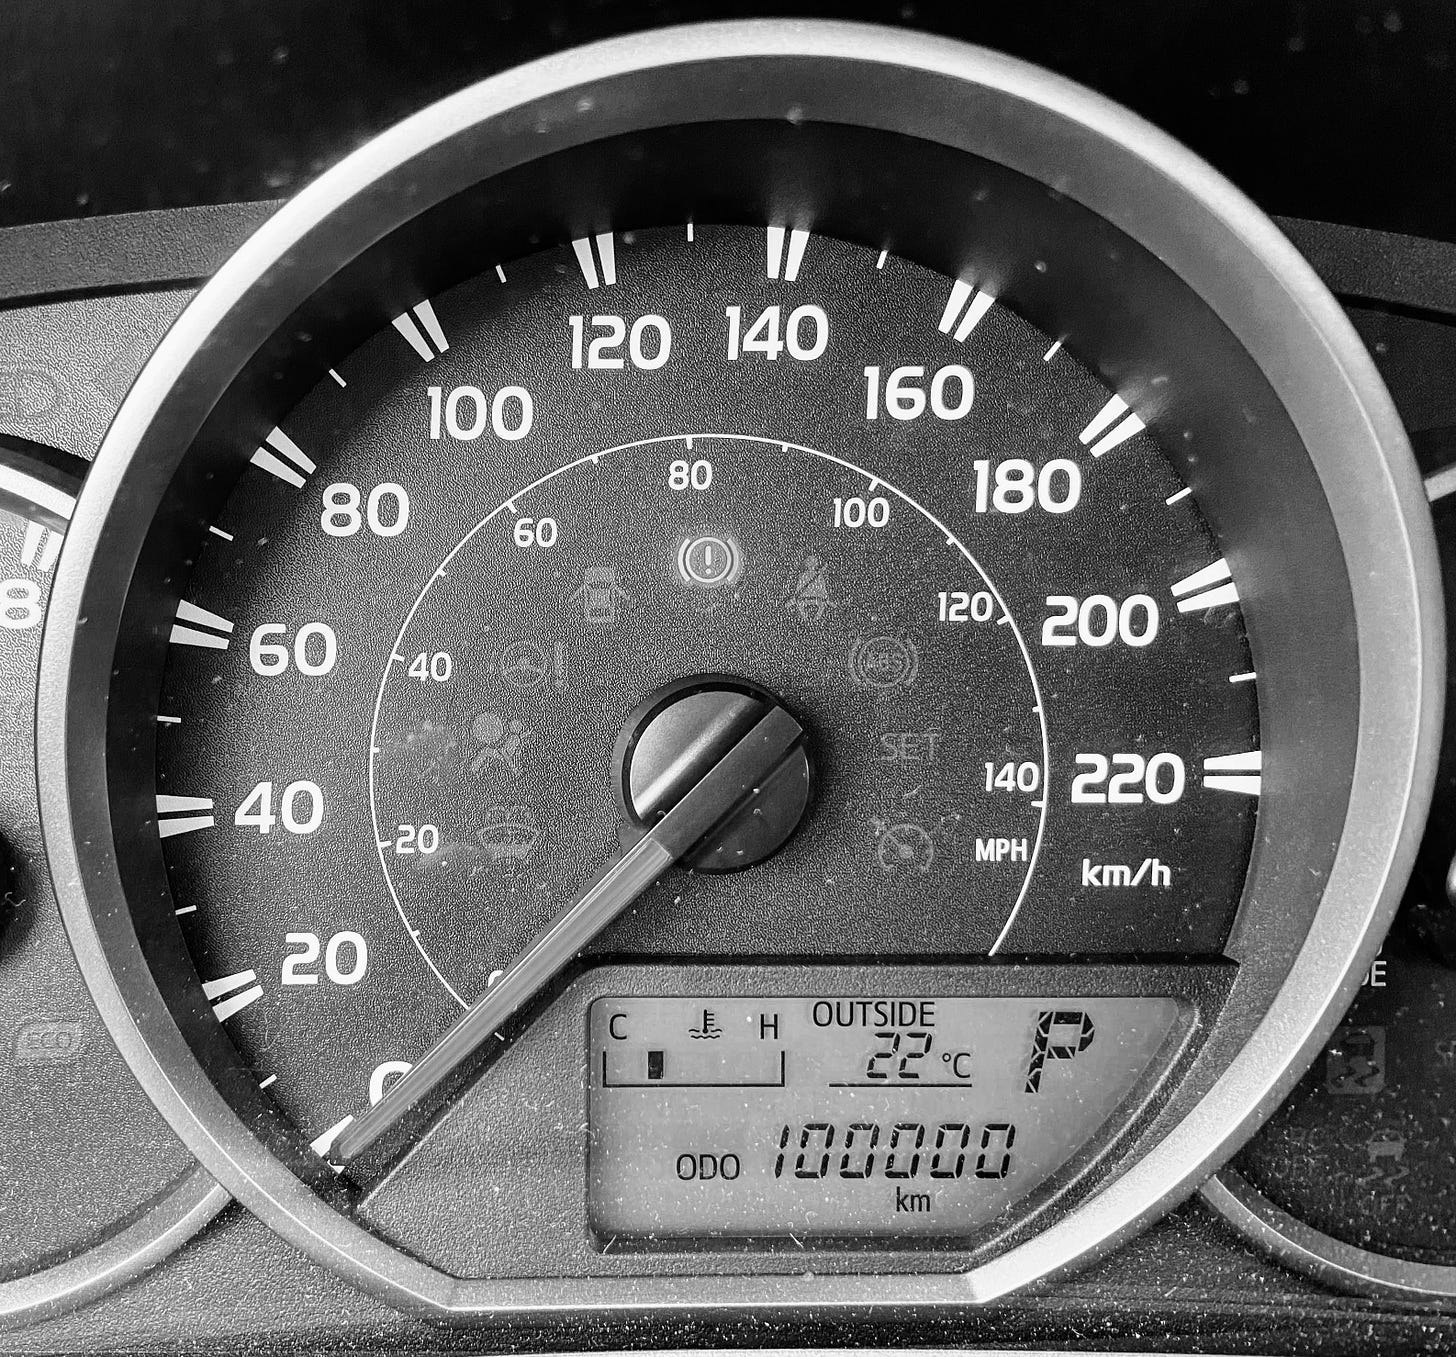 Car odometer in black and white photo showing 100000 km.